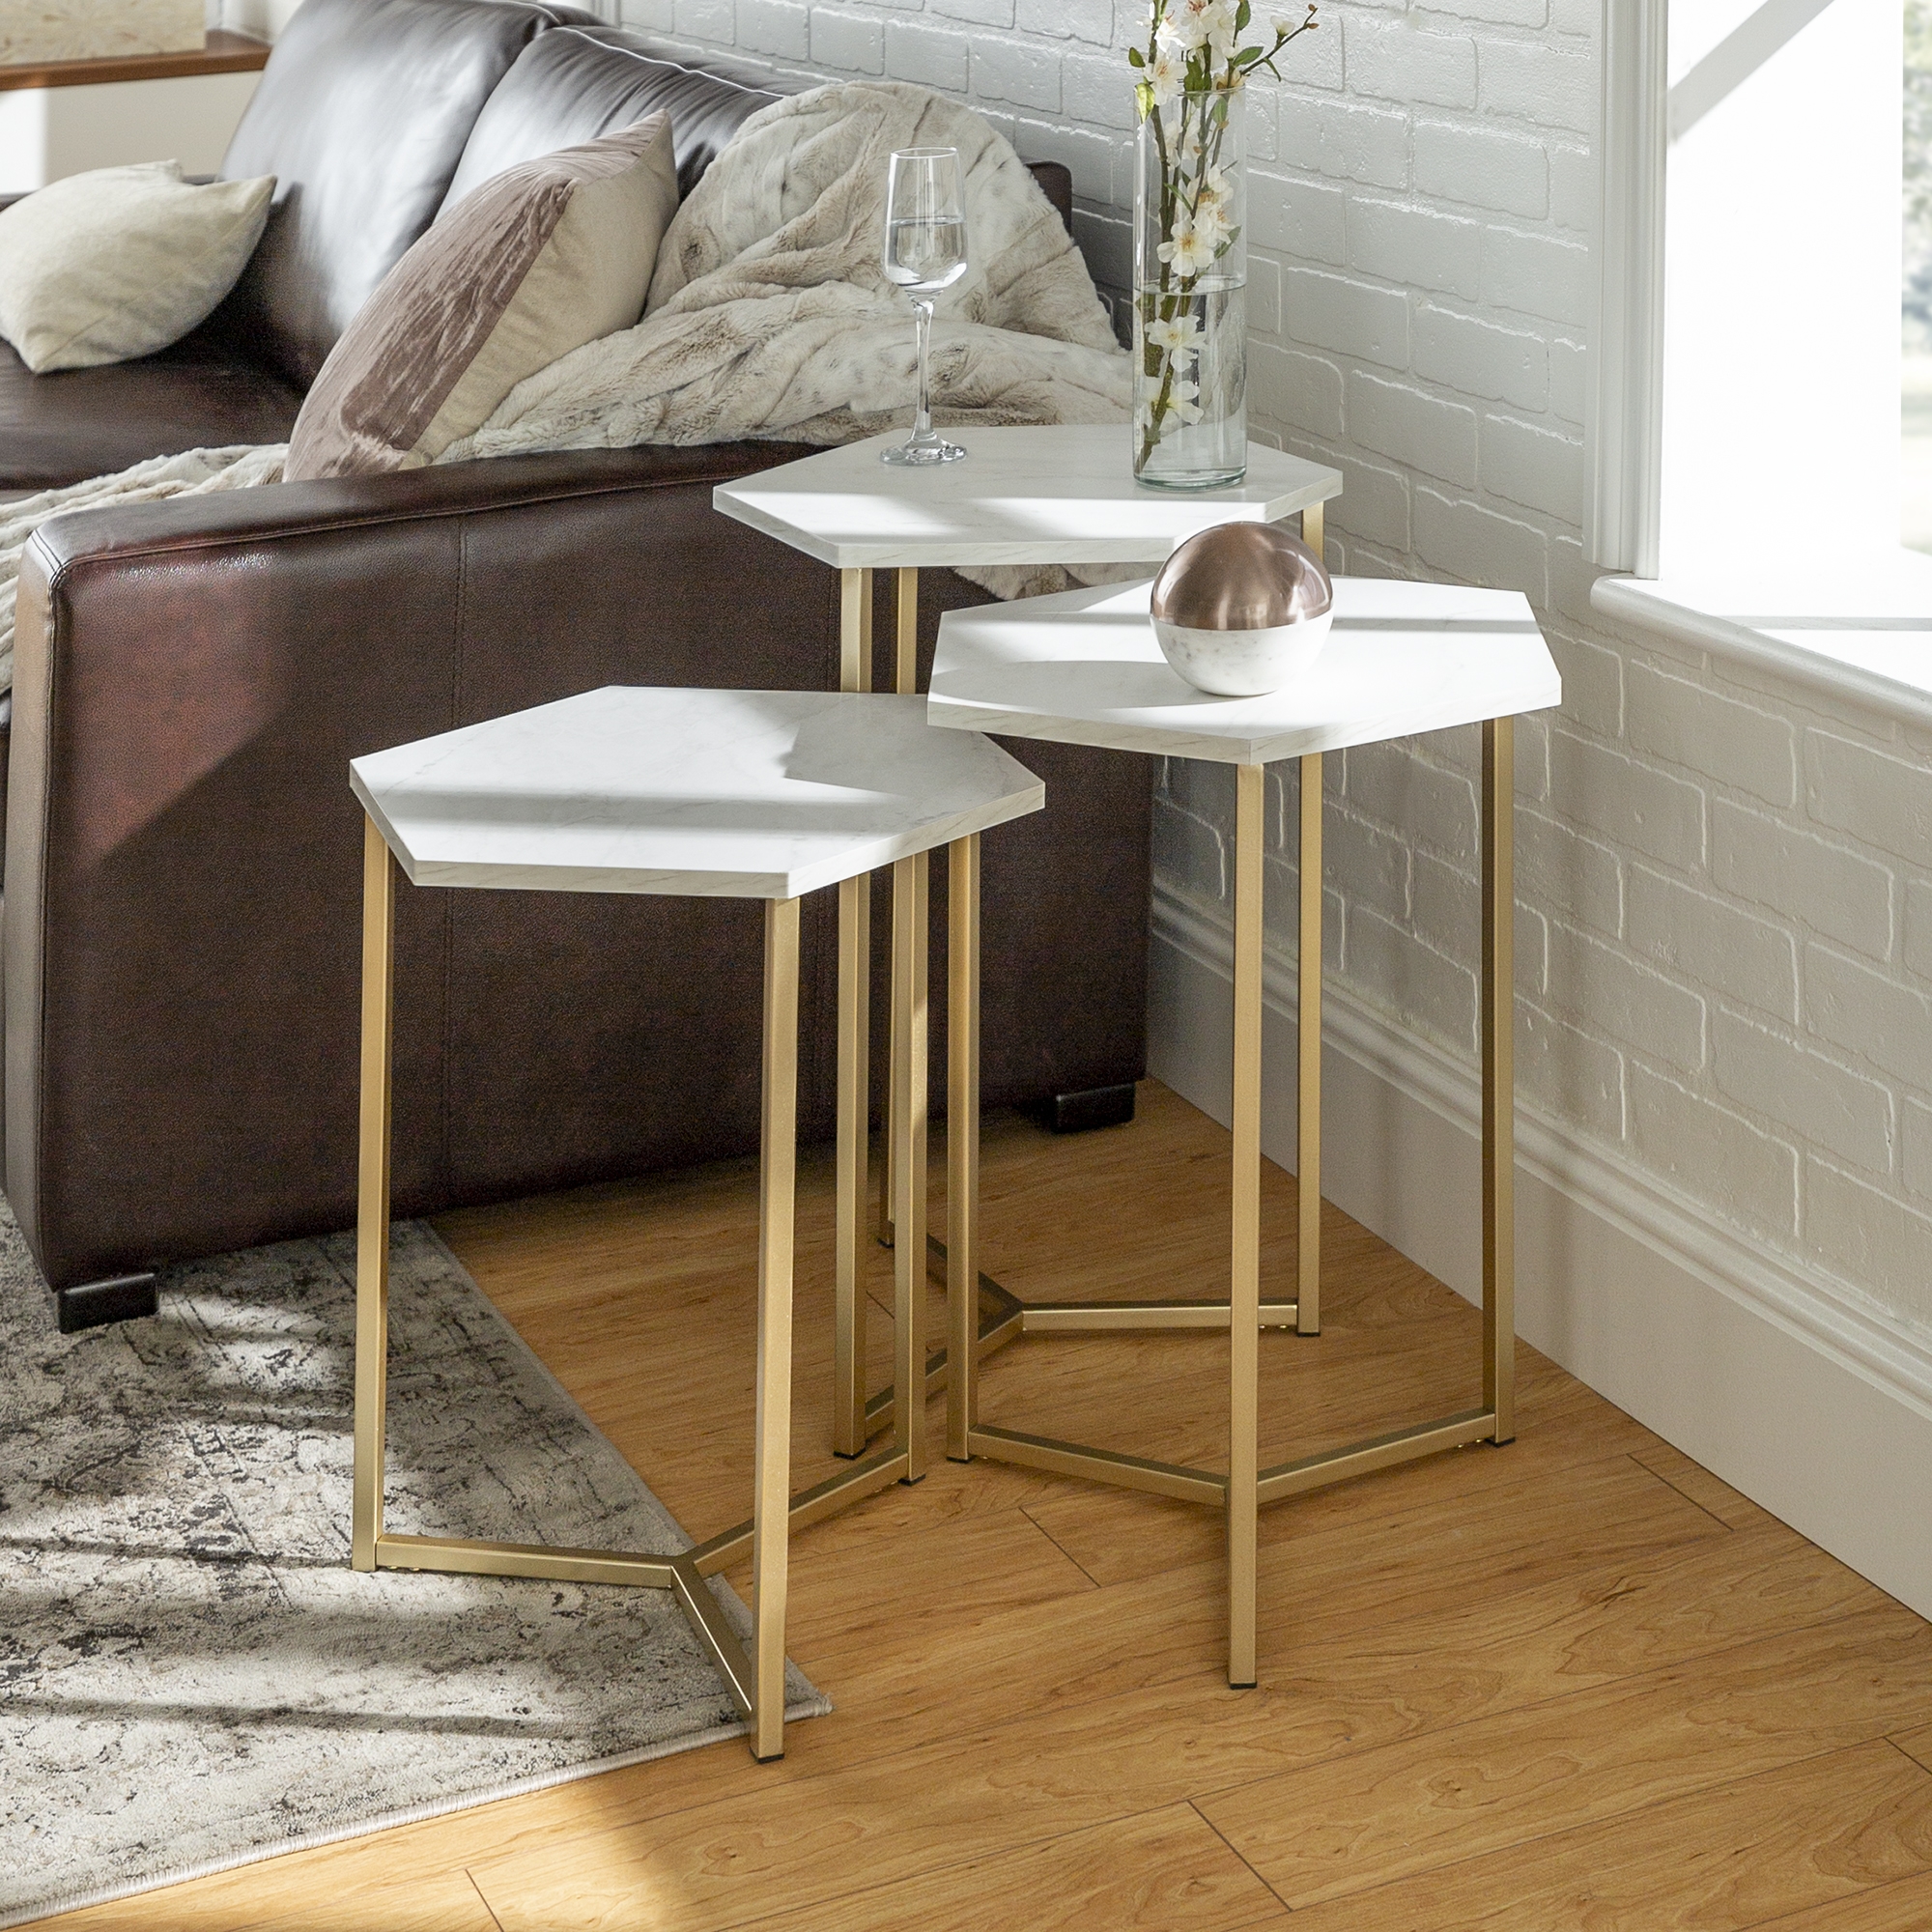 Hexagon Modern Wood Nesting Tables, Set of 3 - Faux White Marble/Gold  - Image 3